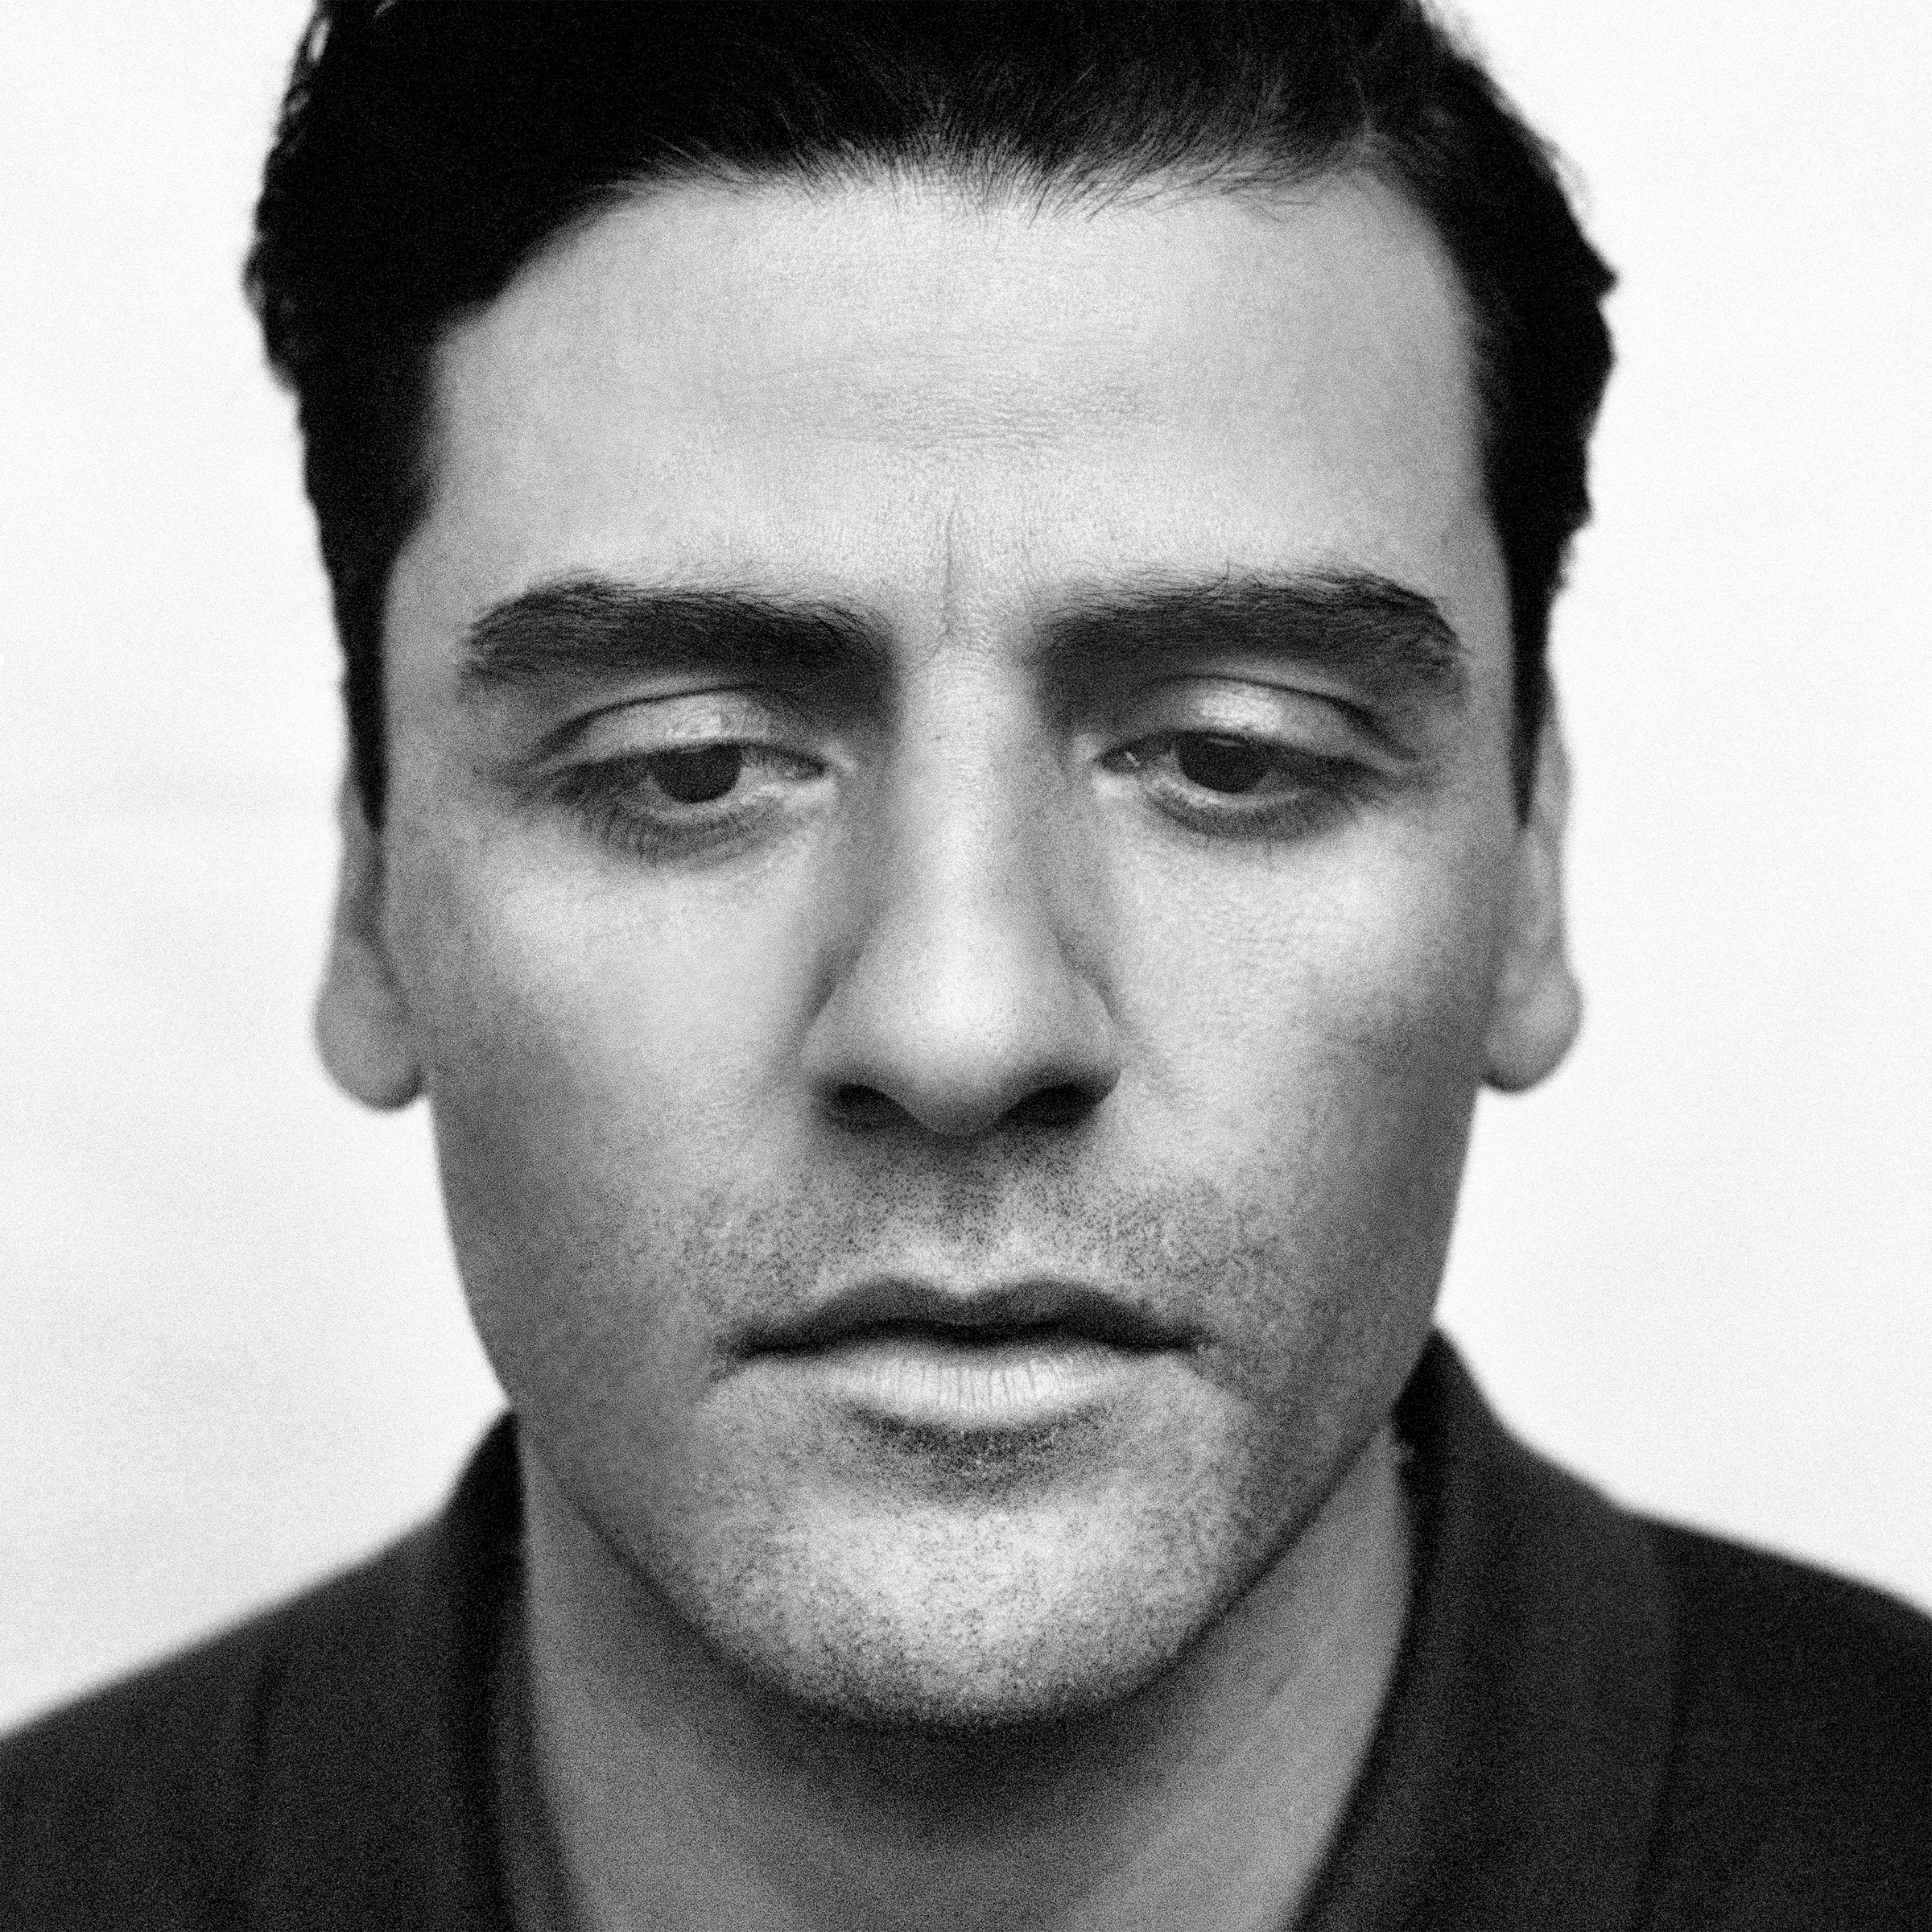 Actor Oscar Isaac, who is a part of the LA Times Drama Actor Roundtable Photo by Jesse Dittmar / For The Times